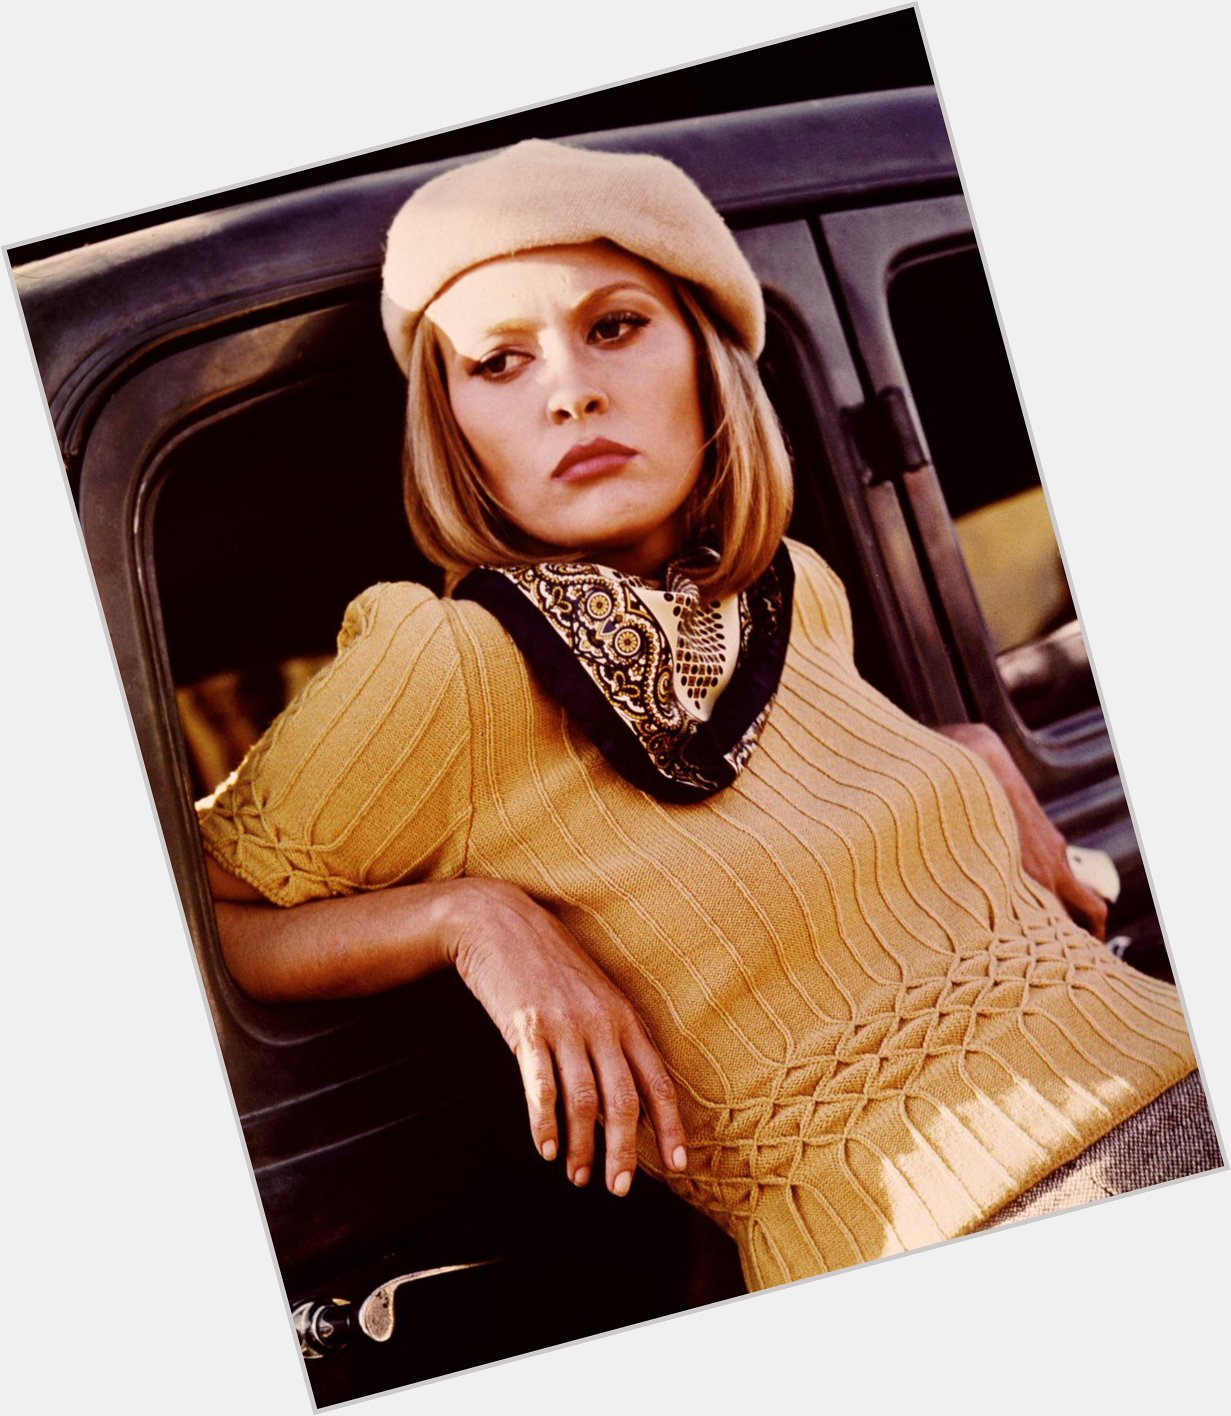 Happy Birthday 77th Birthday Faye Dunaway! \"We rob banks!\" -as Bonnie Parker in Bonnie and Clyde 